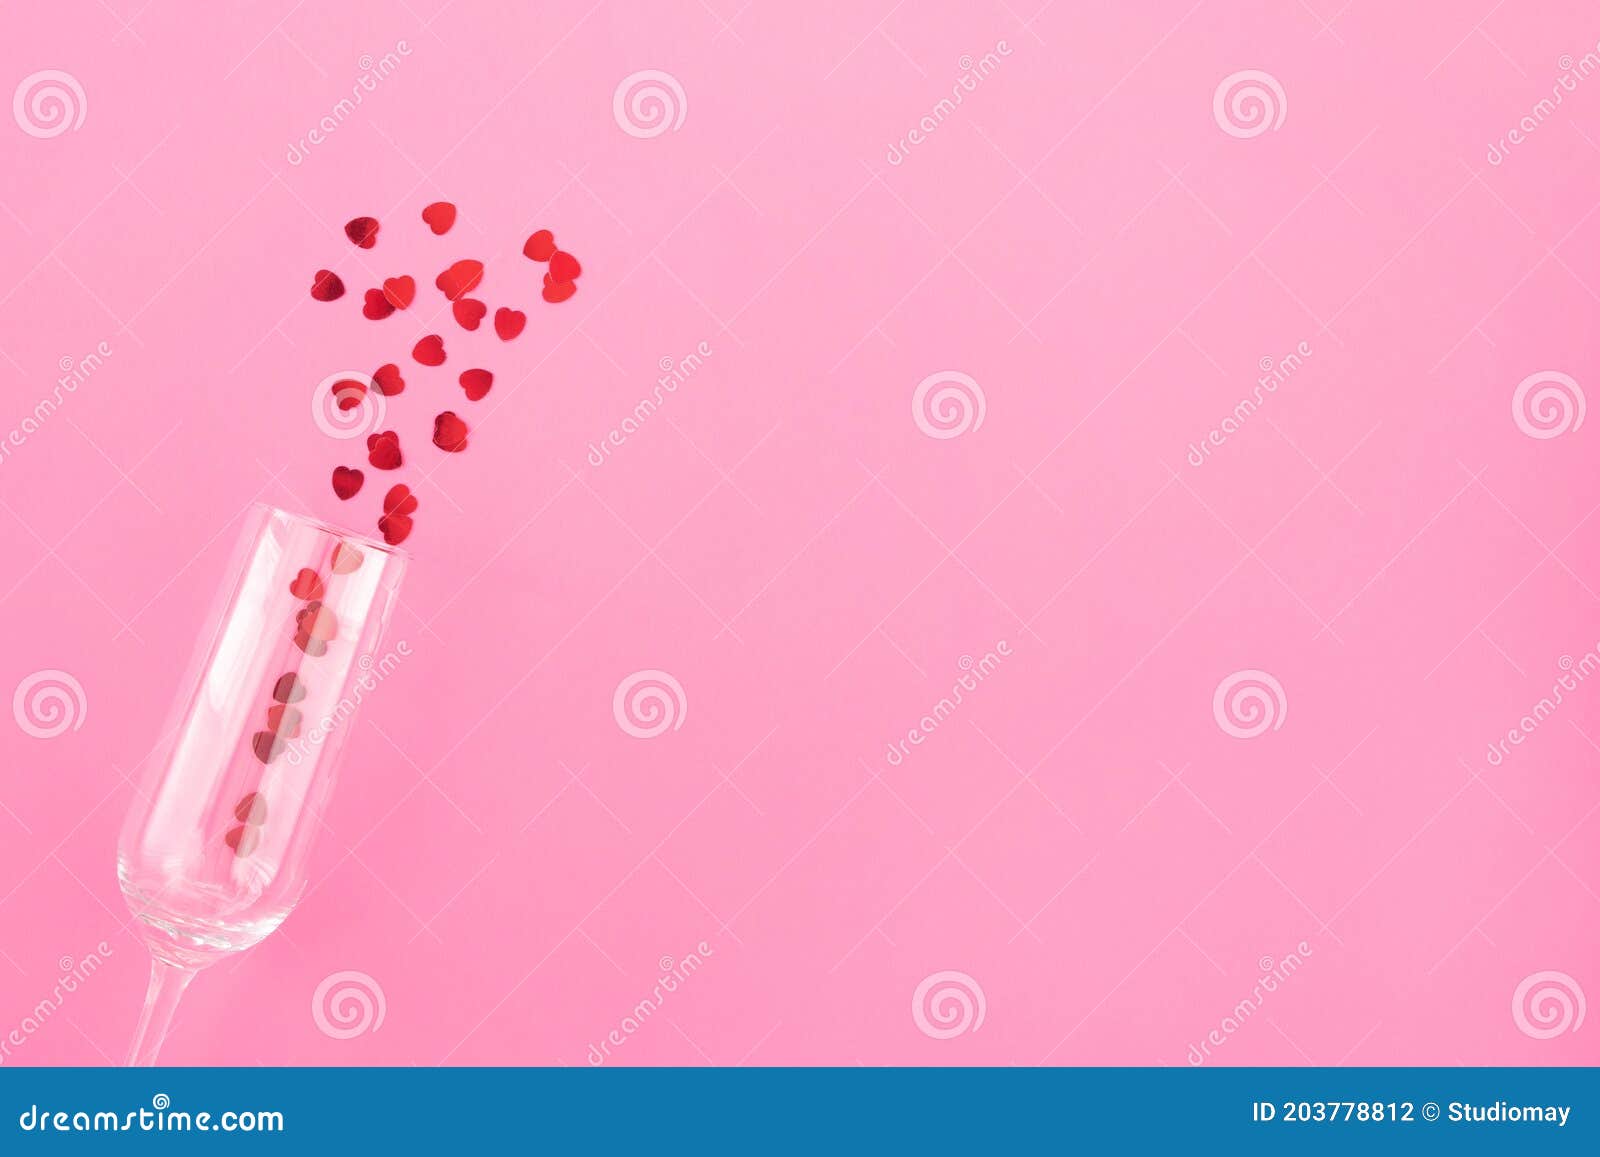 glass of champagne with red hearts on a pink background. valentines background, love, date concept with copy space, flatlay